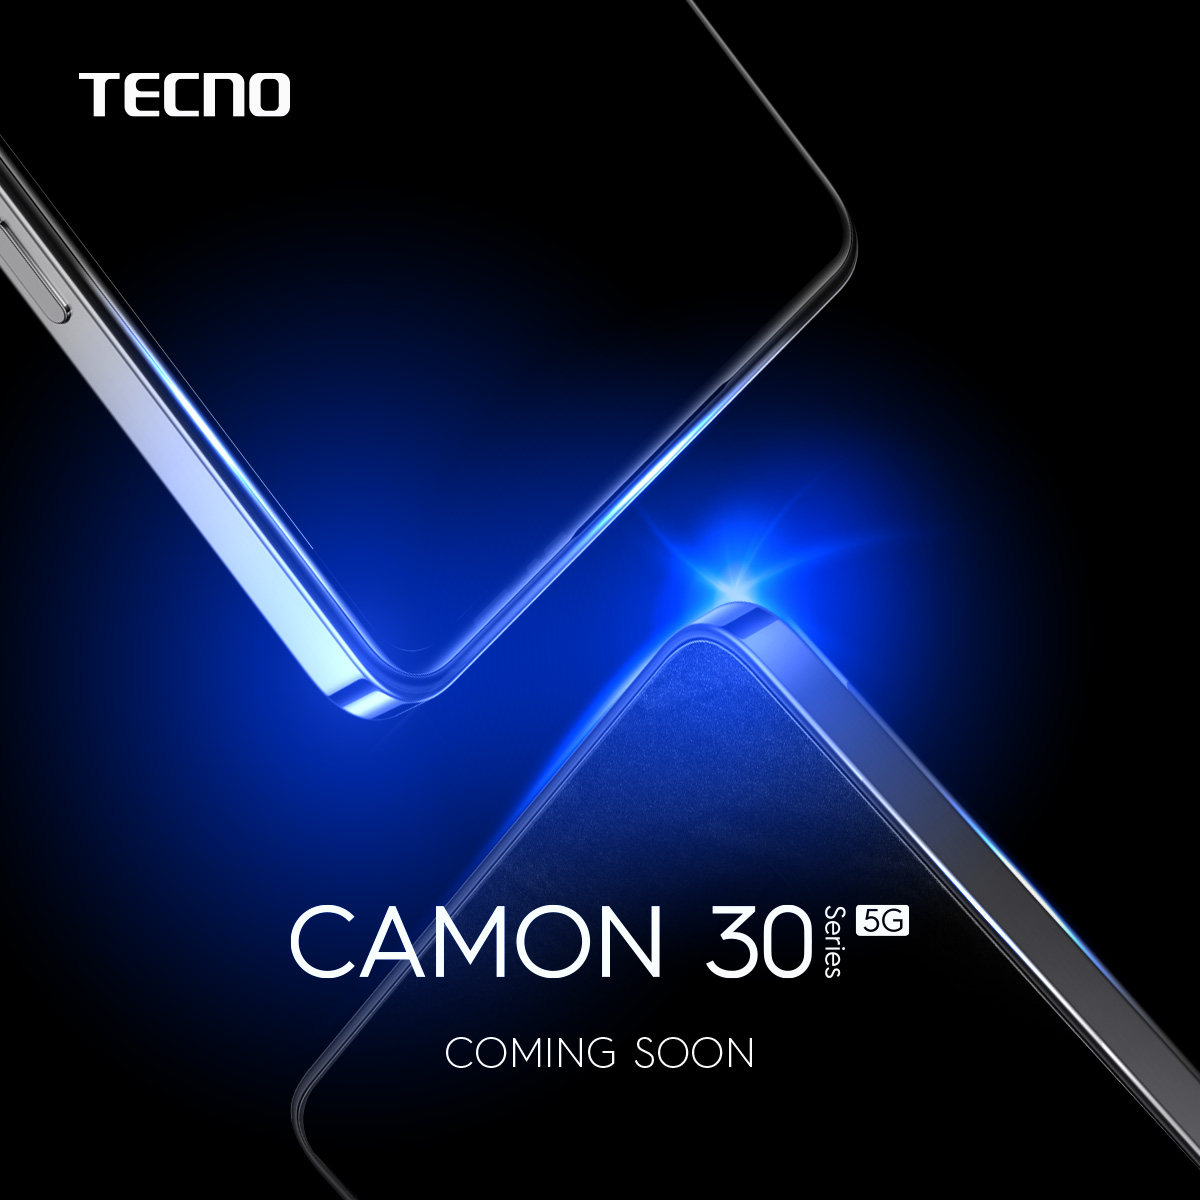 Guess the three new features coming to our latest phone! #CAMON30SERIES #CAMON30AIPhone